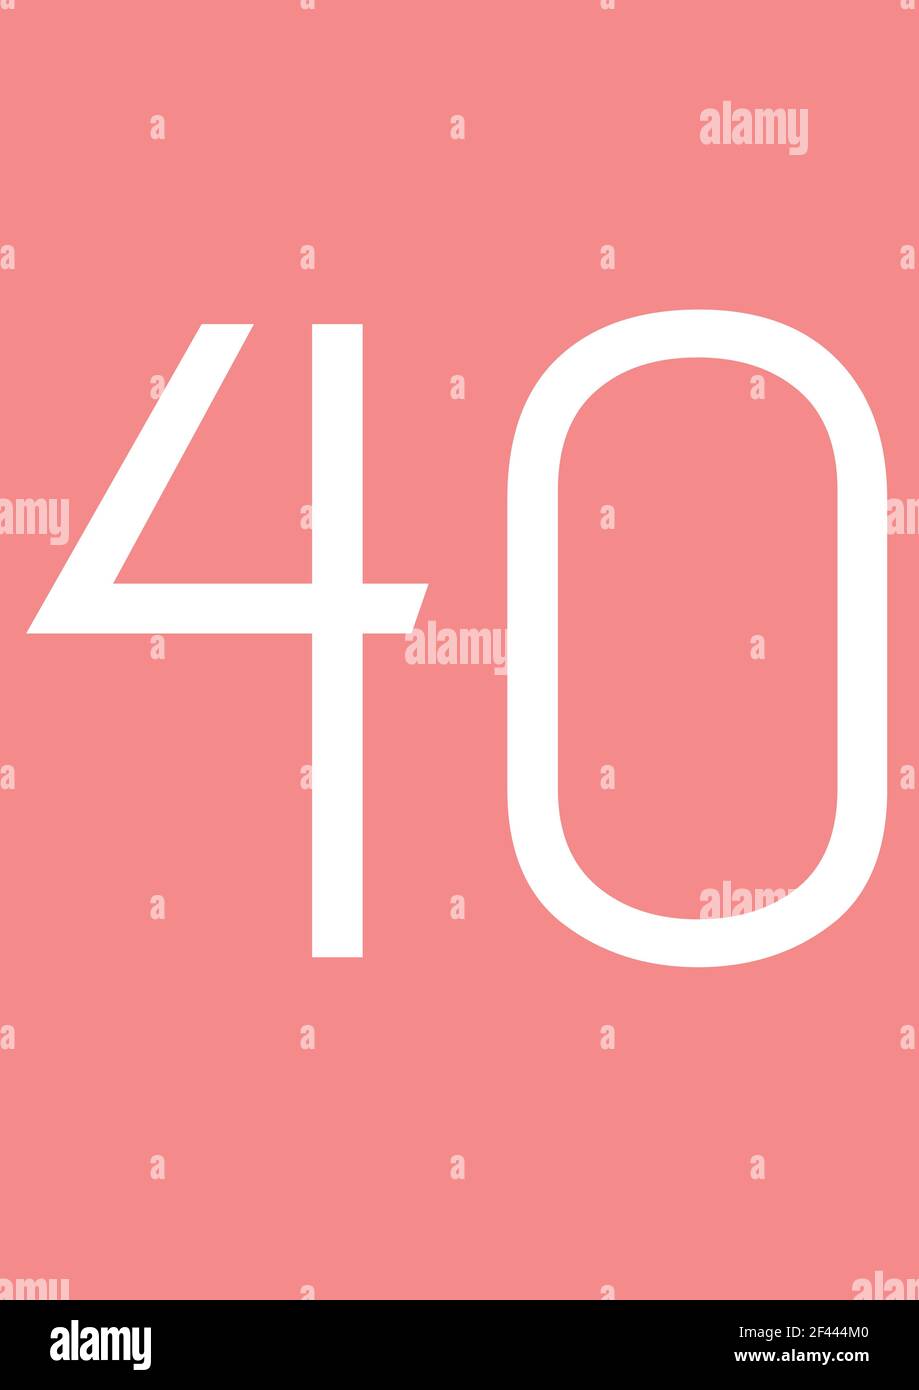 Digitally generated image of 21 number text against pink background Stock Photo